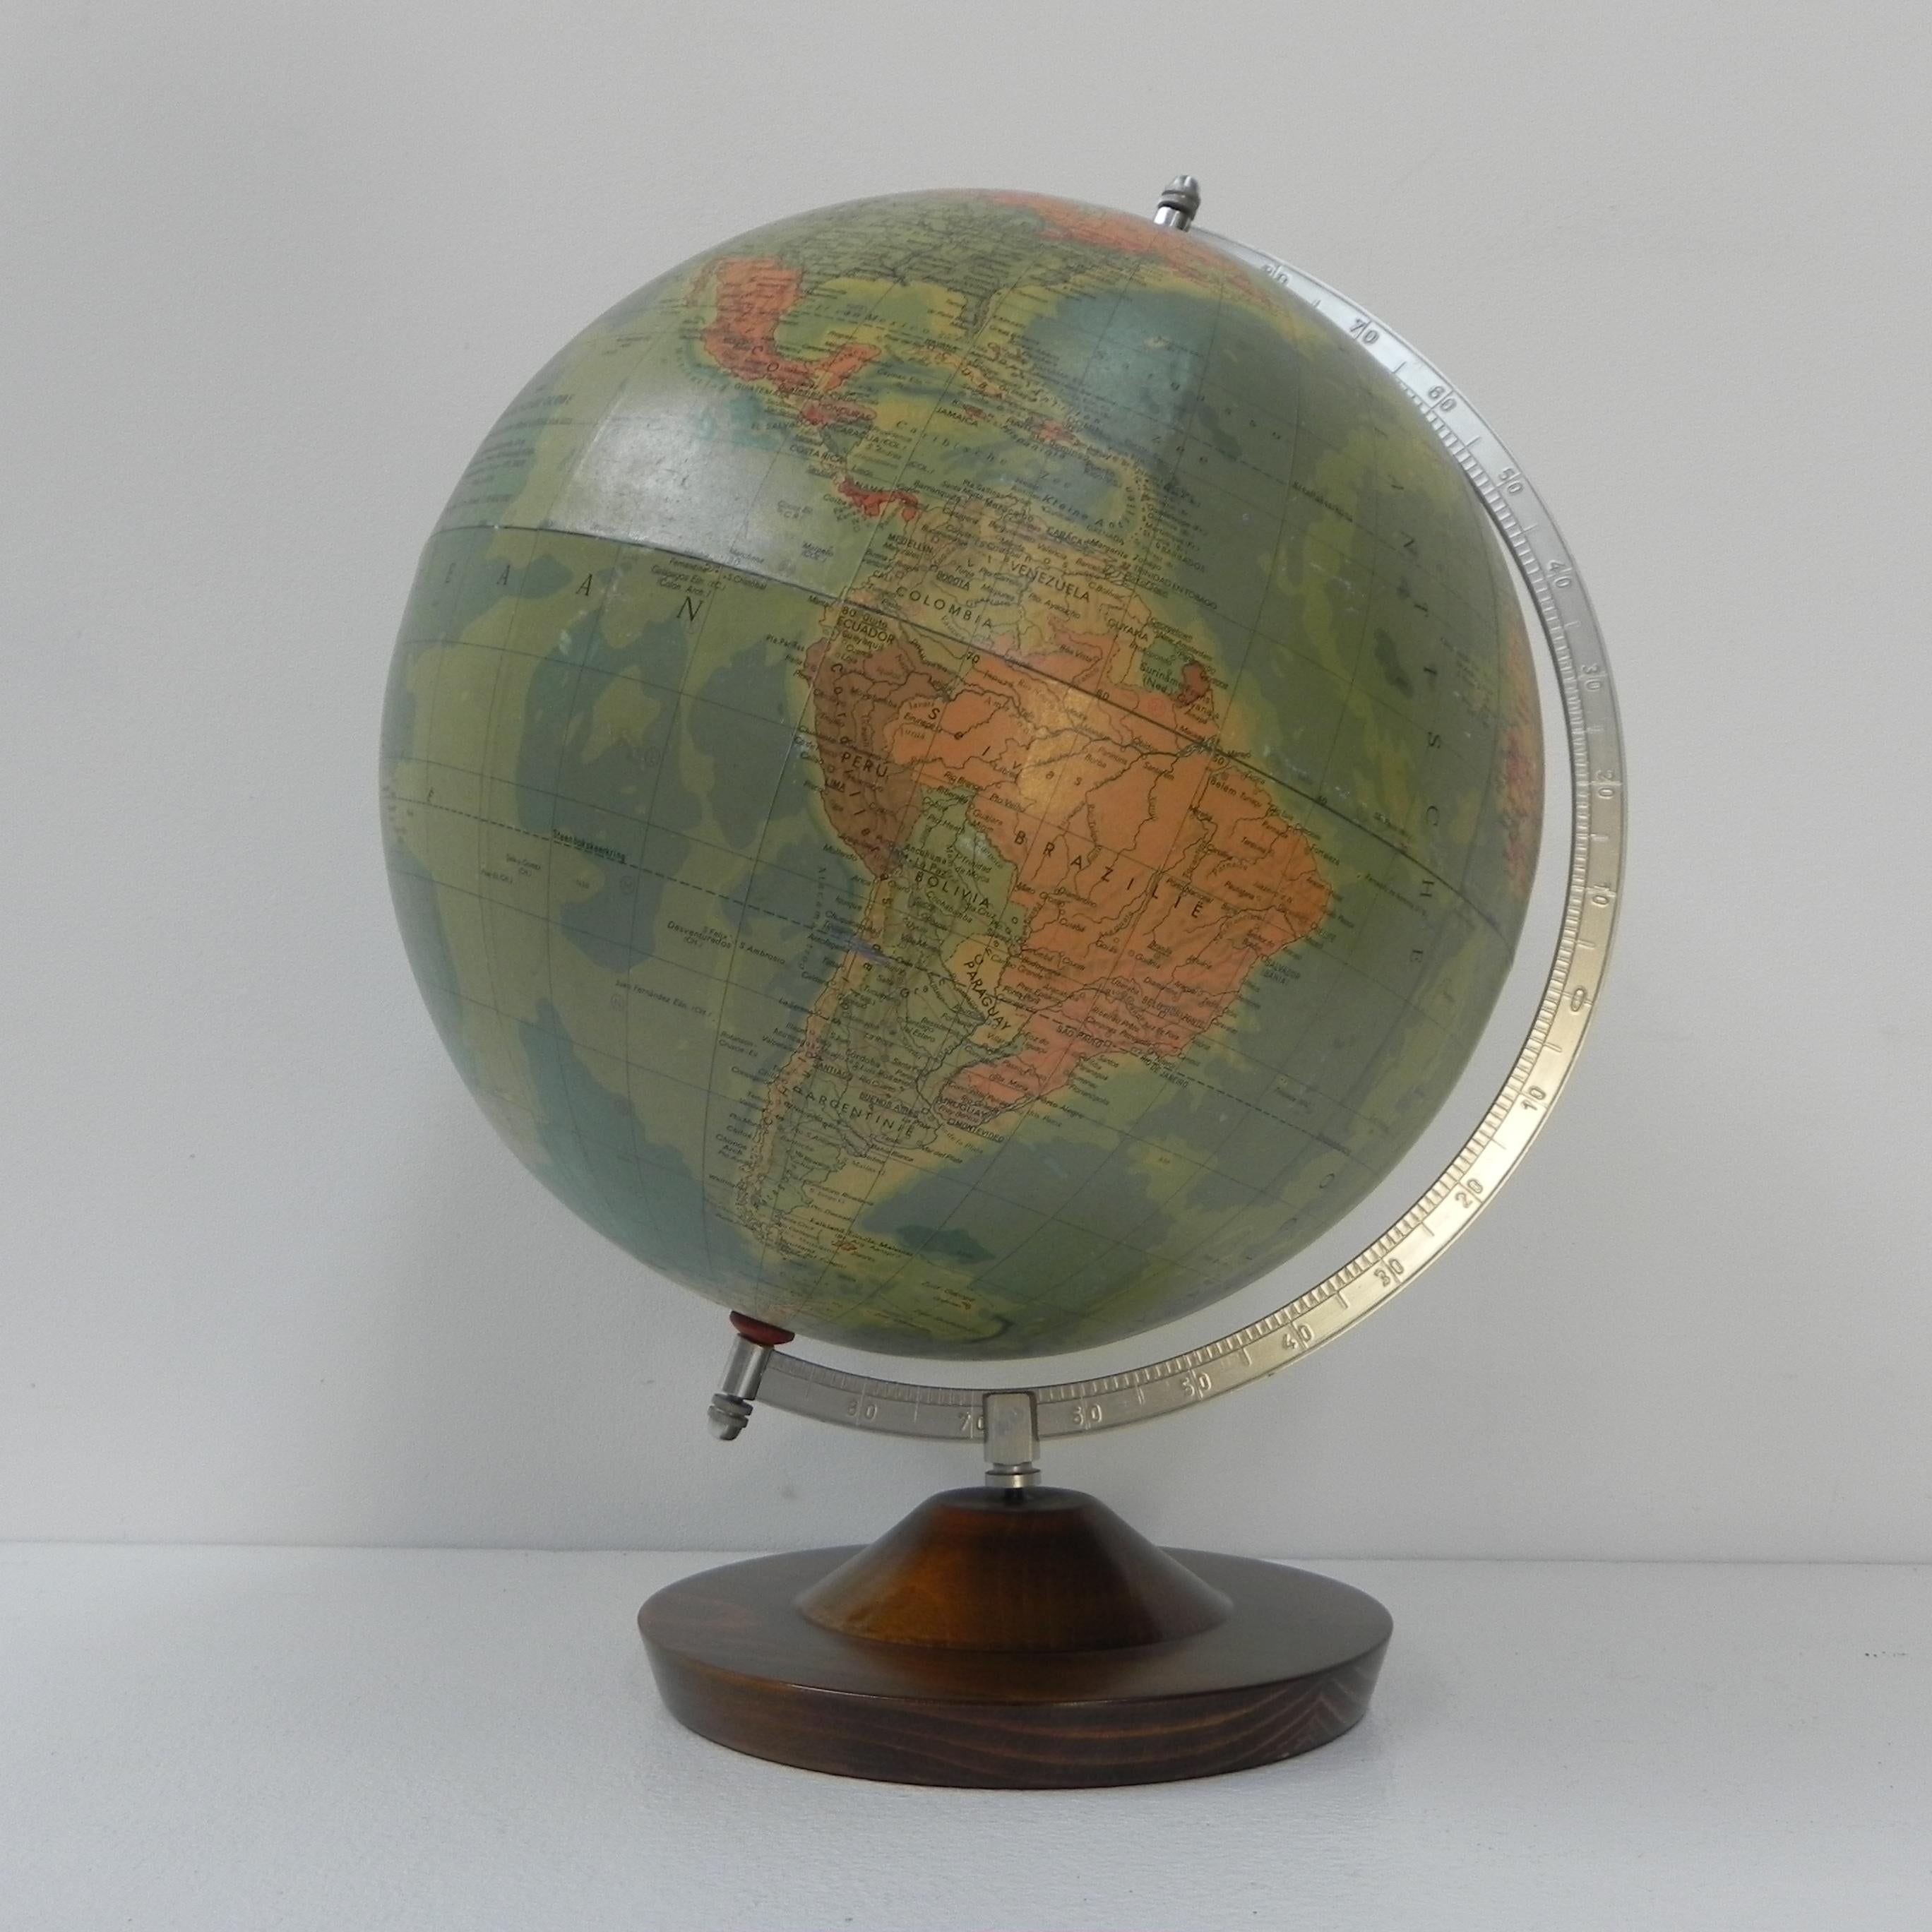 This beautiful globe has some minor damage
at the height of the Galapagos Islands.

Height: 50 cm.
Width: 35 cm.
Depth (= Ø sphere): 33 cm.
Origin: The Netherlands, 1960s.
Material: cardboard / aluminum / wood.